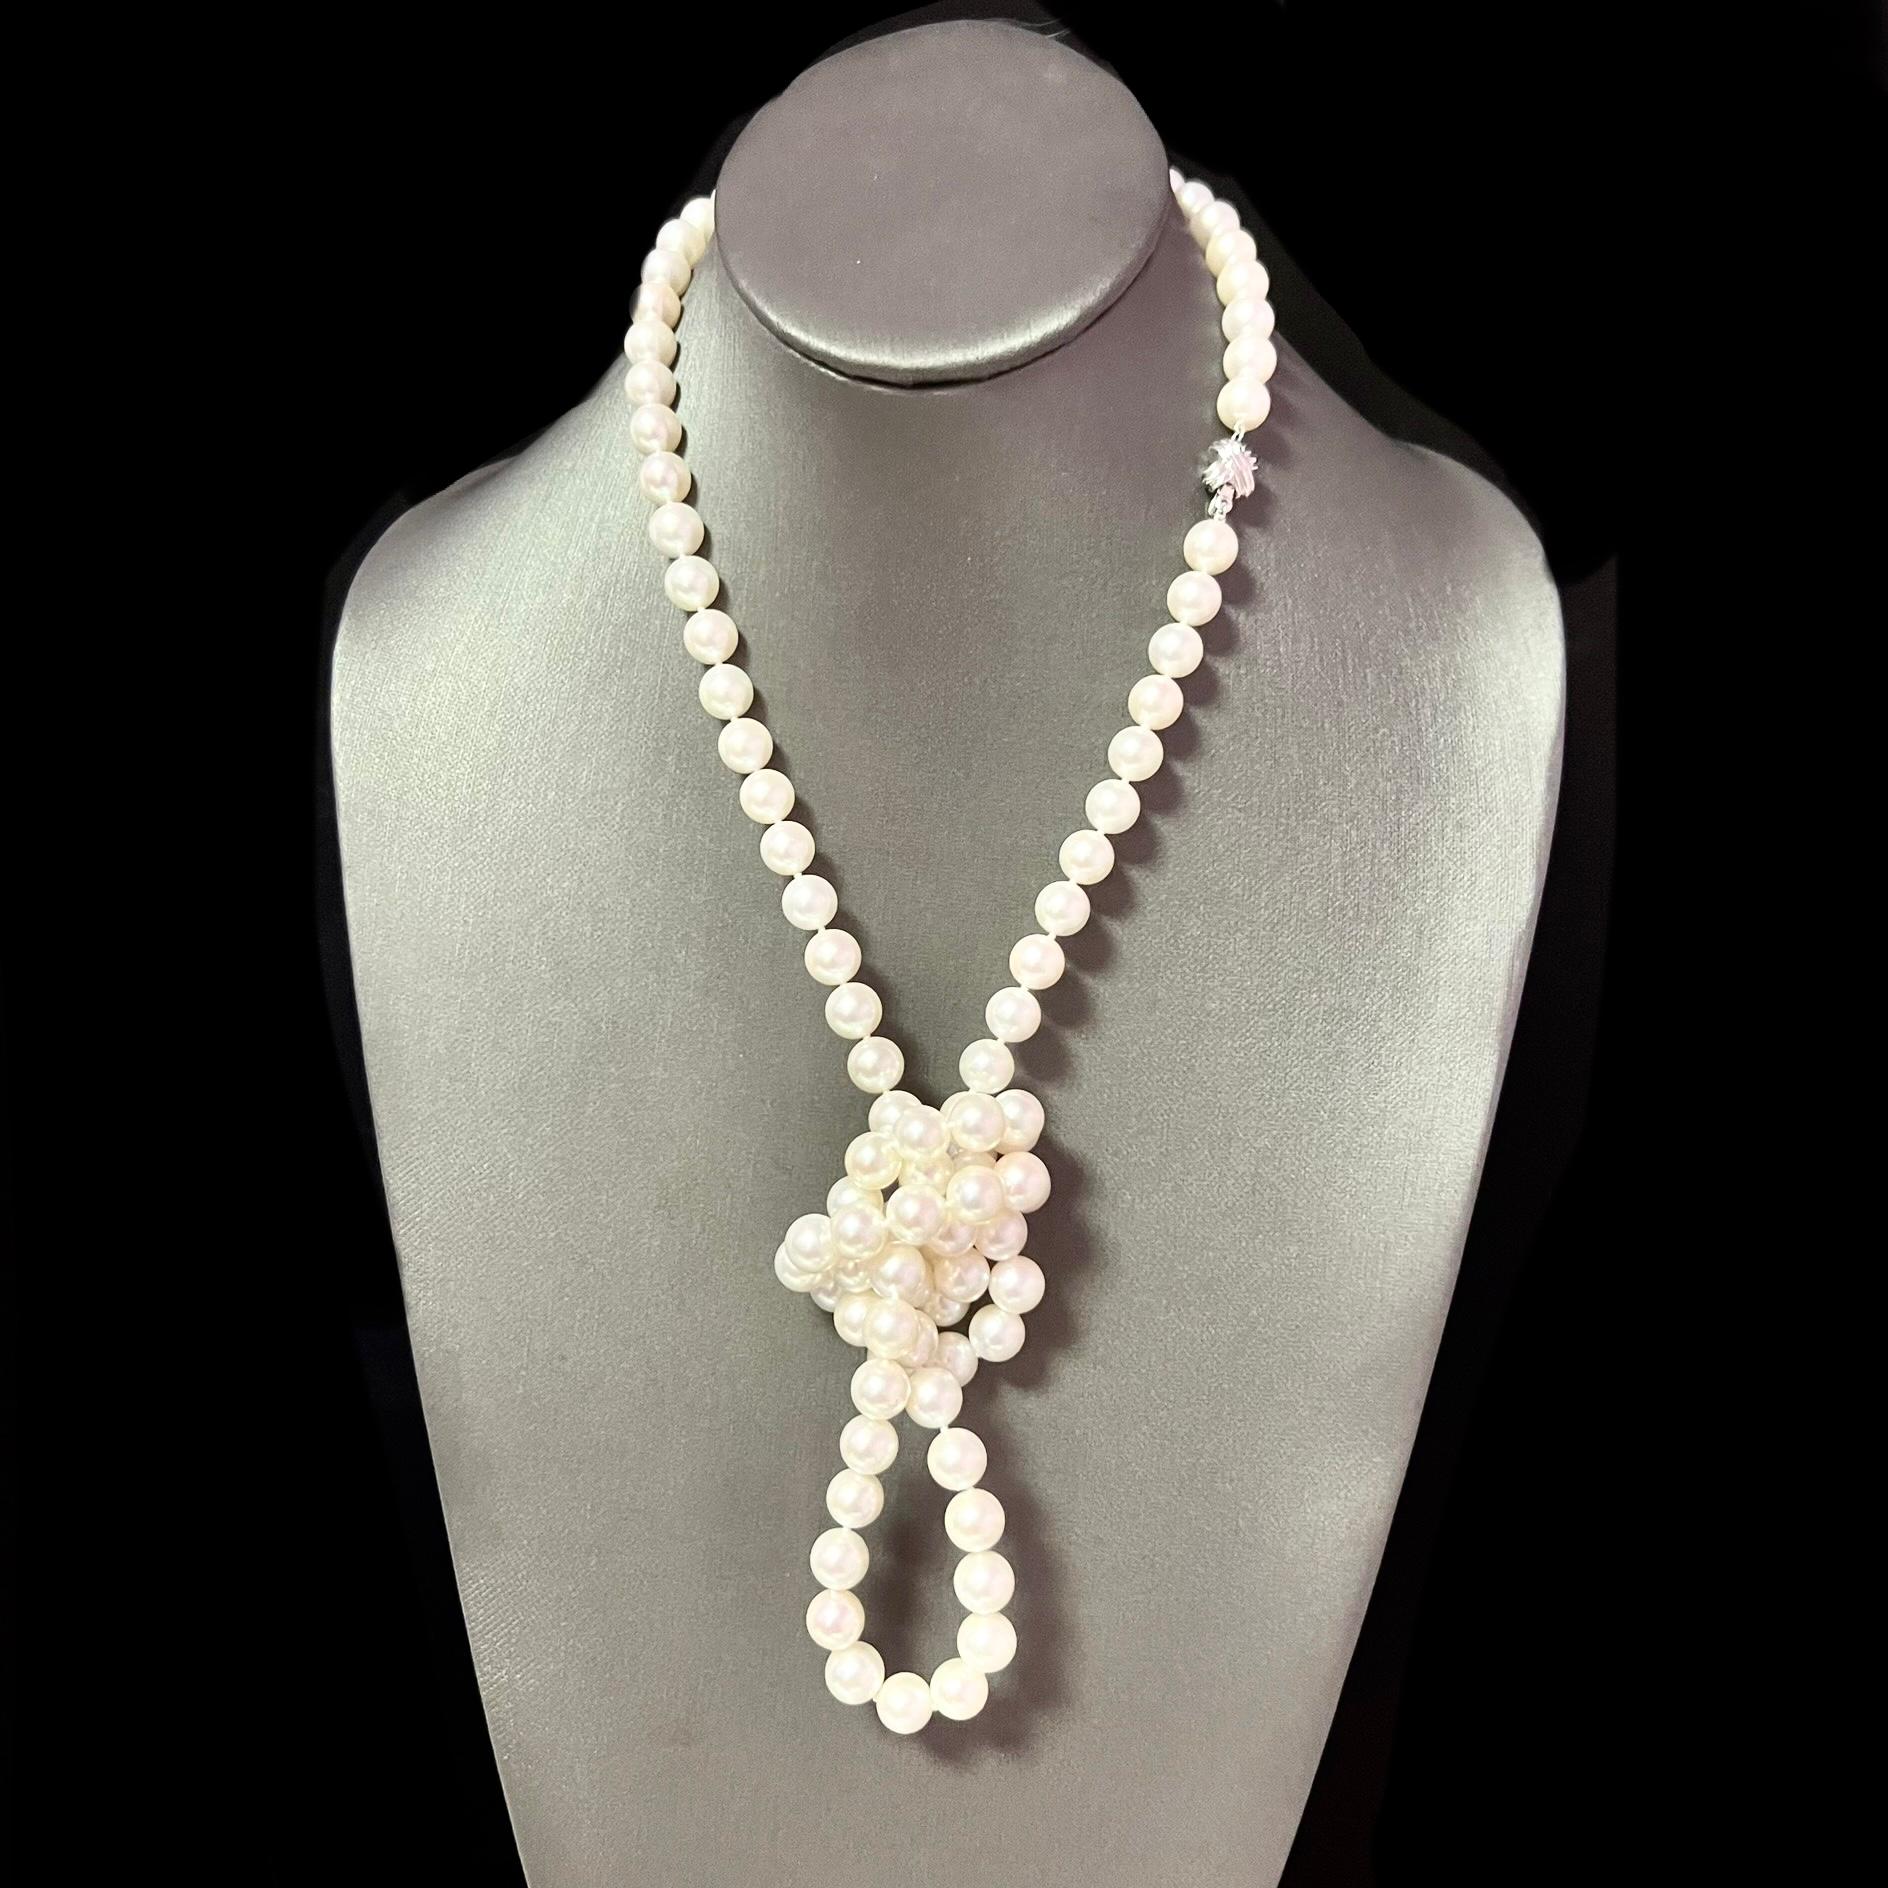 Fine Quality Tiffany & Co Estate Akoya Pearl Necklace 34 inches  18k White Gold Clasp Certified $39,850 308491

Nothing says, “I Love you” more than Diamonds and Pearls!

This necklace is from Tiffany and Co. Top of the line Signature X Akoya pearl